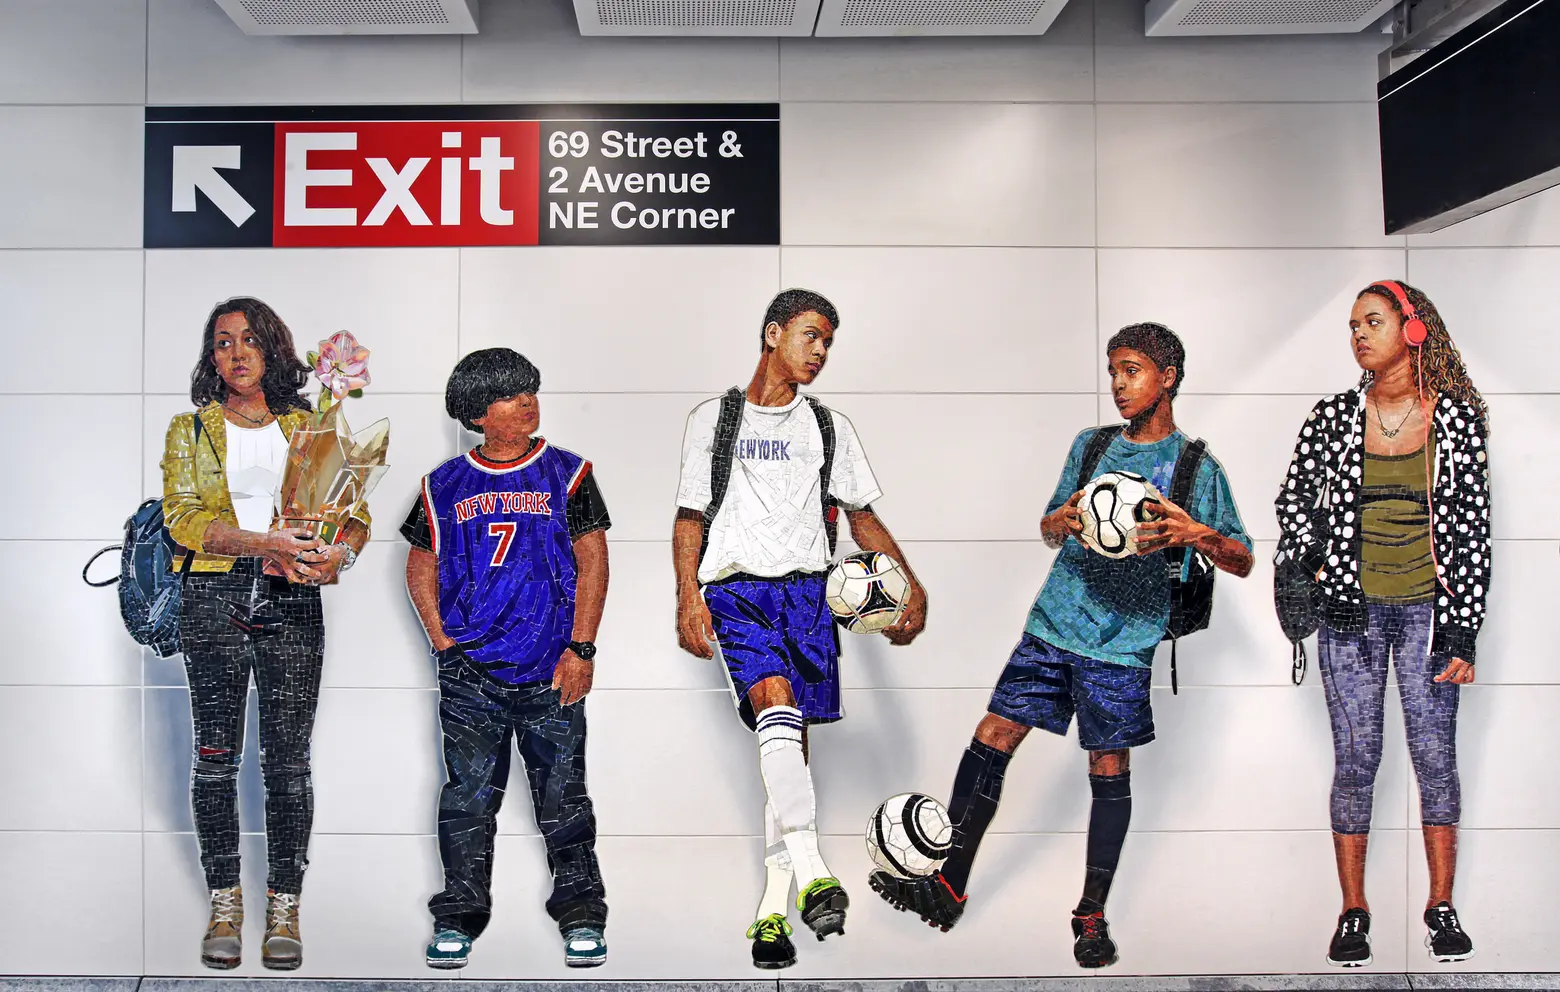 GIVEAWAY! Win 2 tour tickets to “Art and Architecture of the Second Avenue Subway”